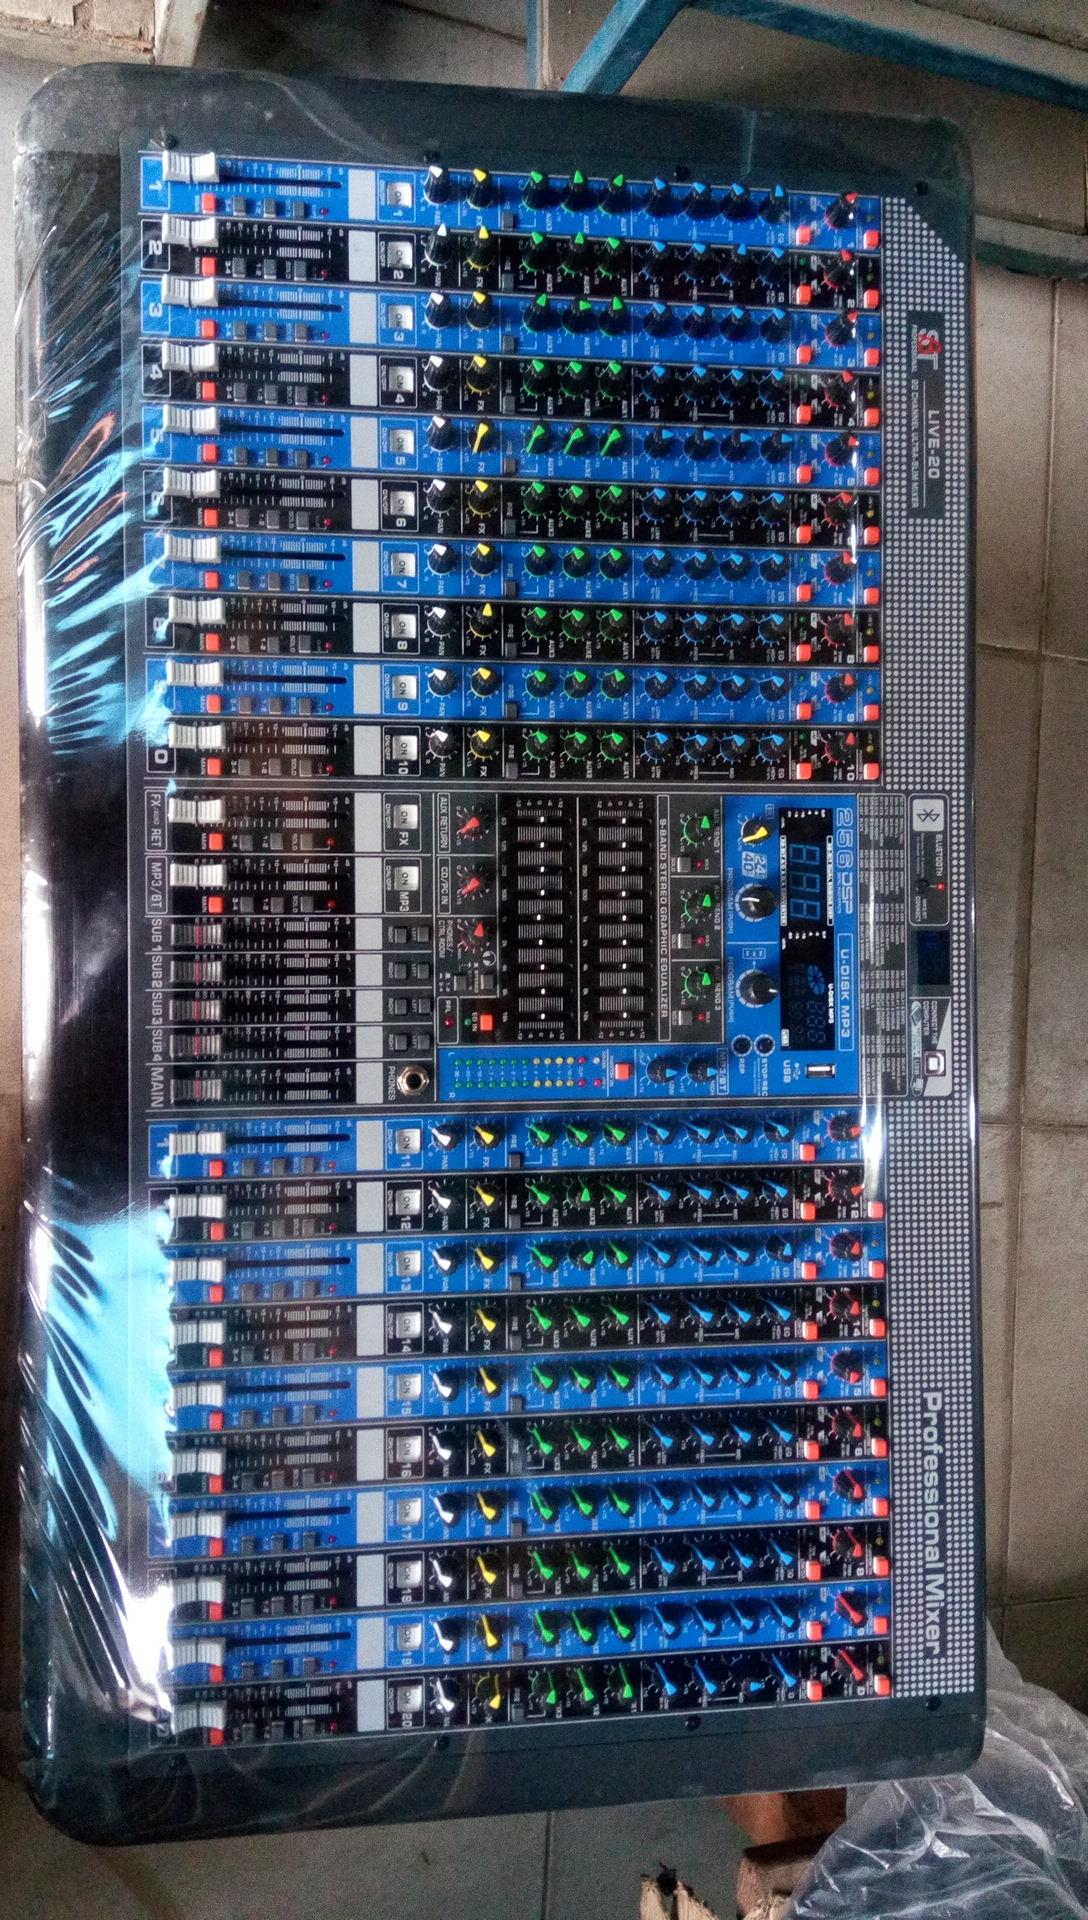 Sbt live mixer for music production